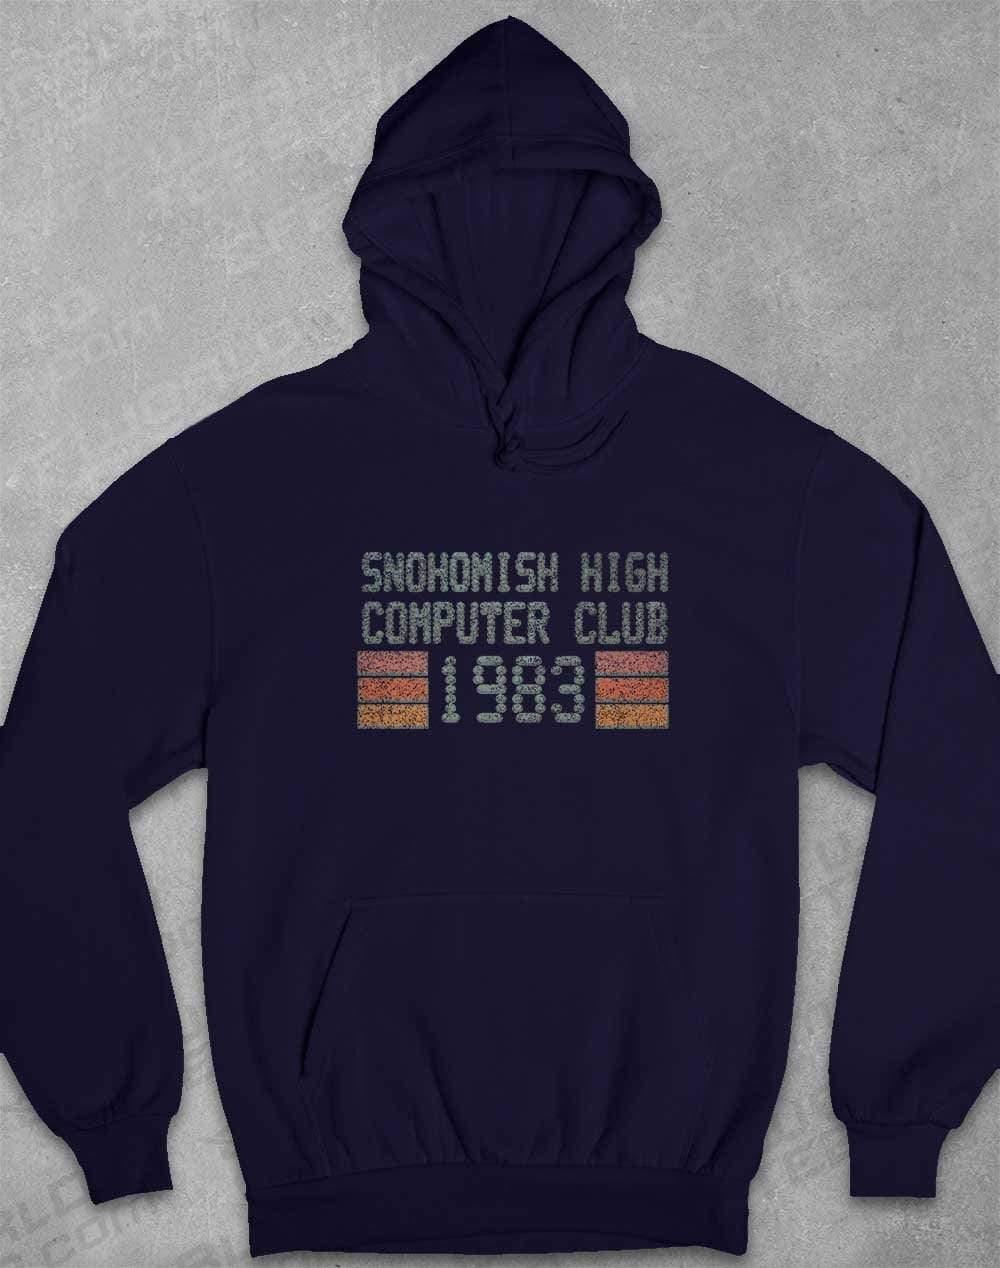 Snohomish High Computer Club Hoodie XS / Oxford Navy  - Off World Tees